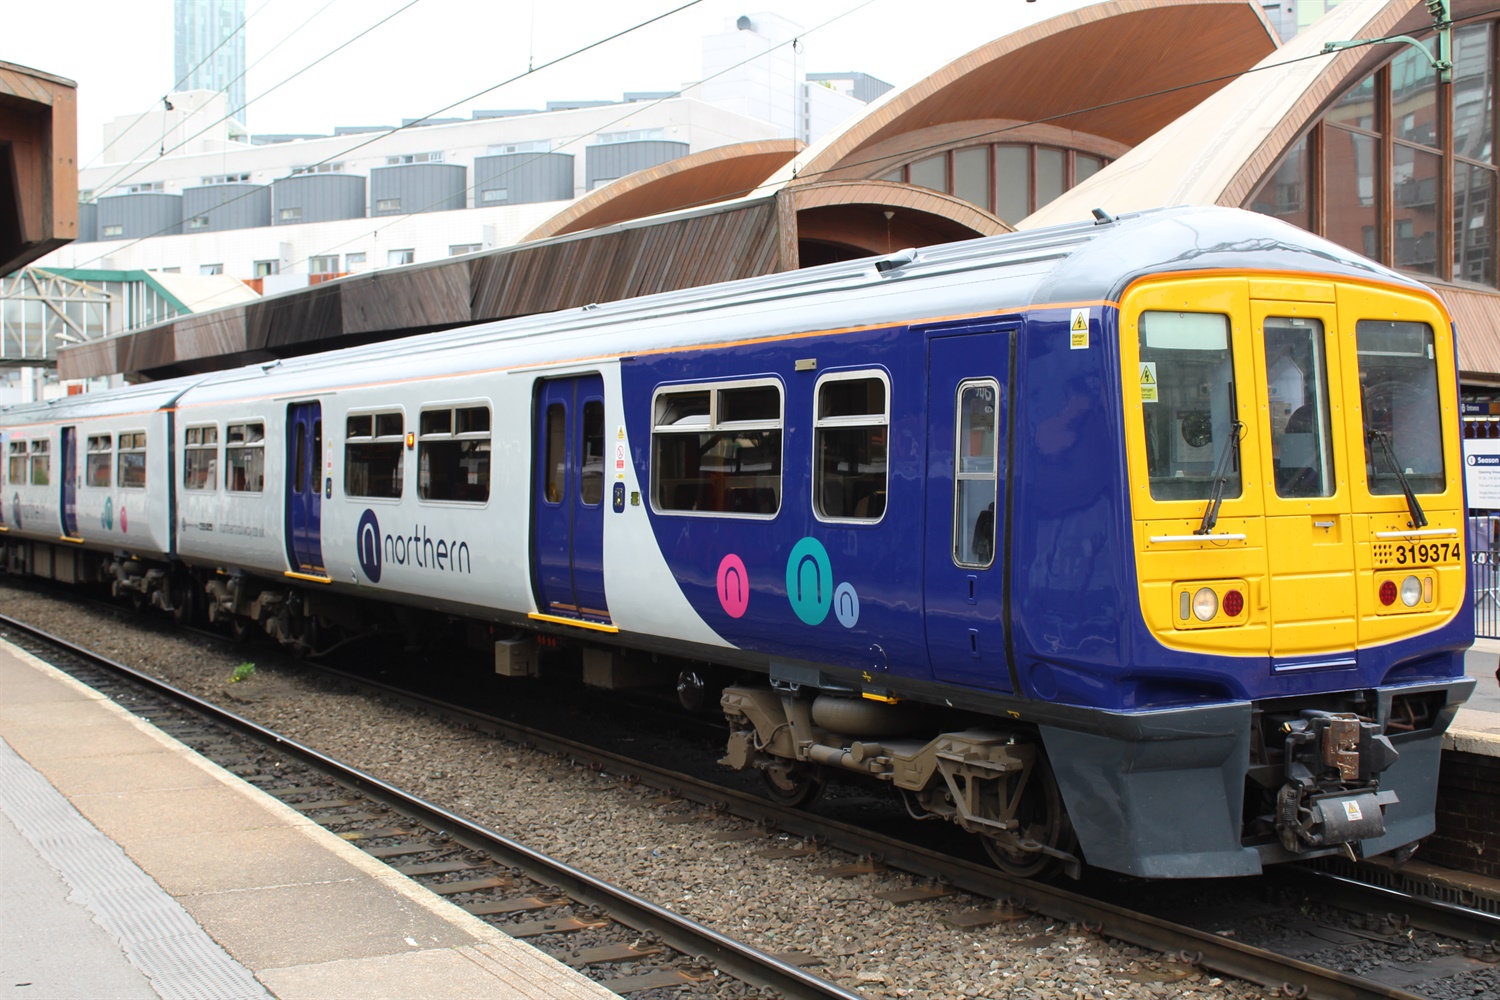 NR and Northern to review failures of recent timetable shake-up ahead of December changes